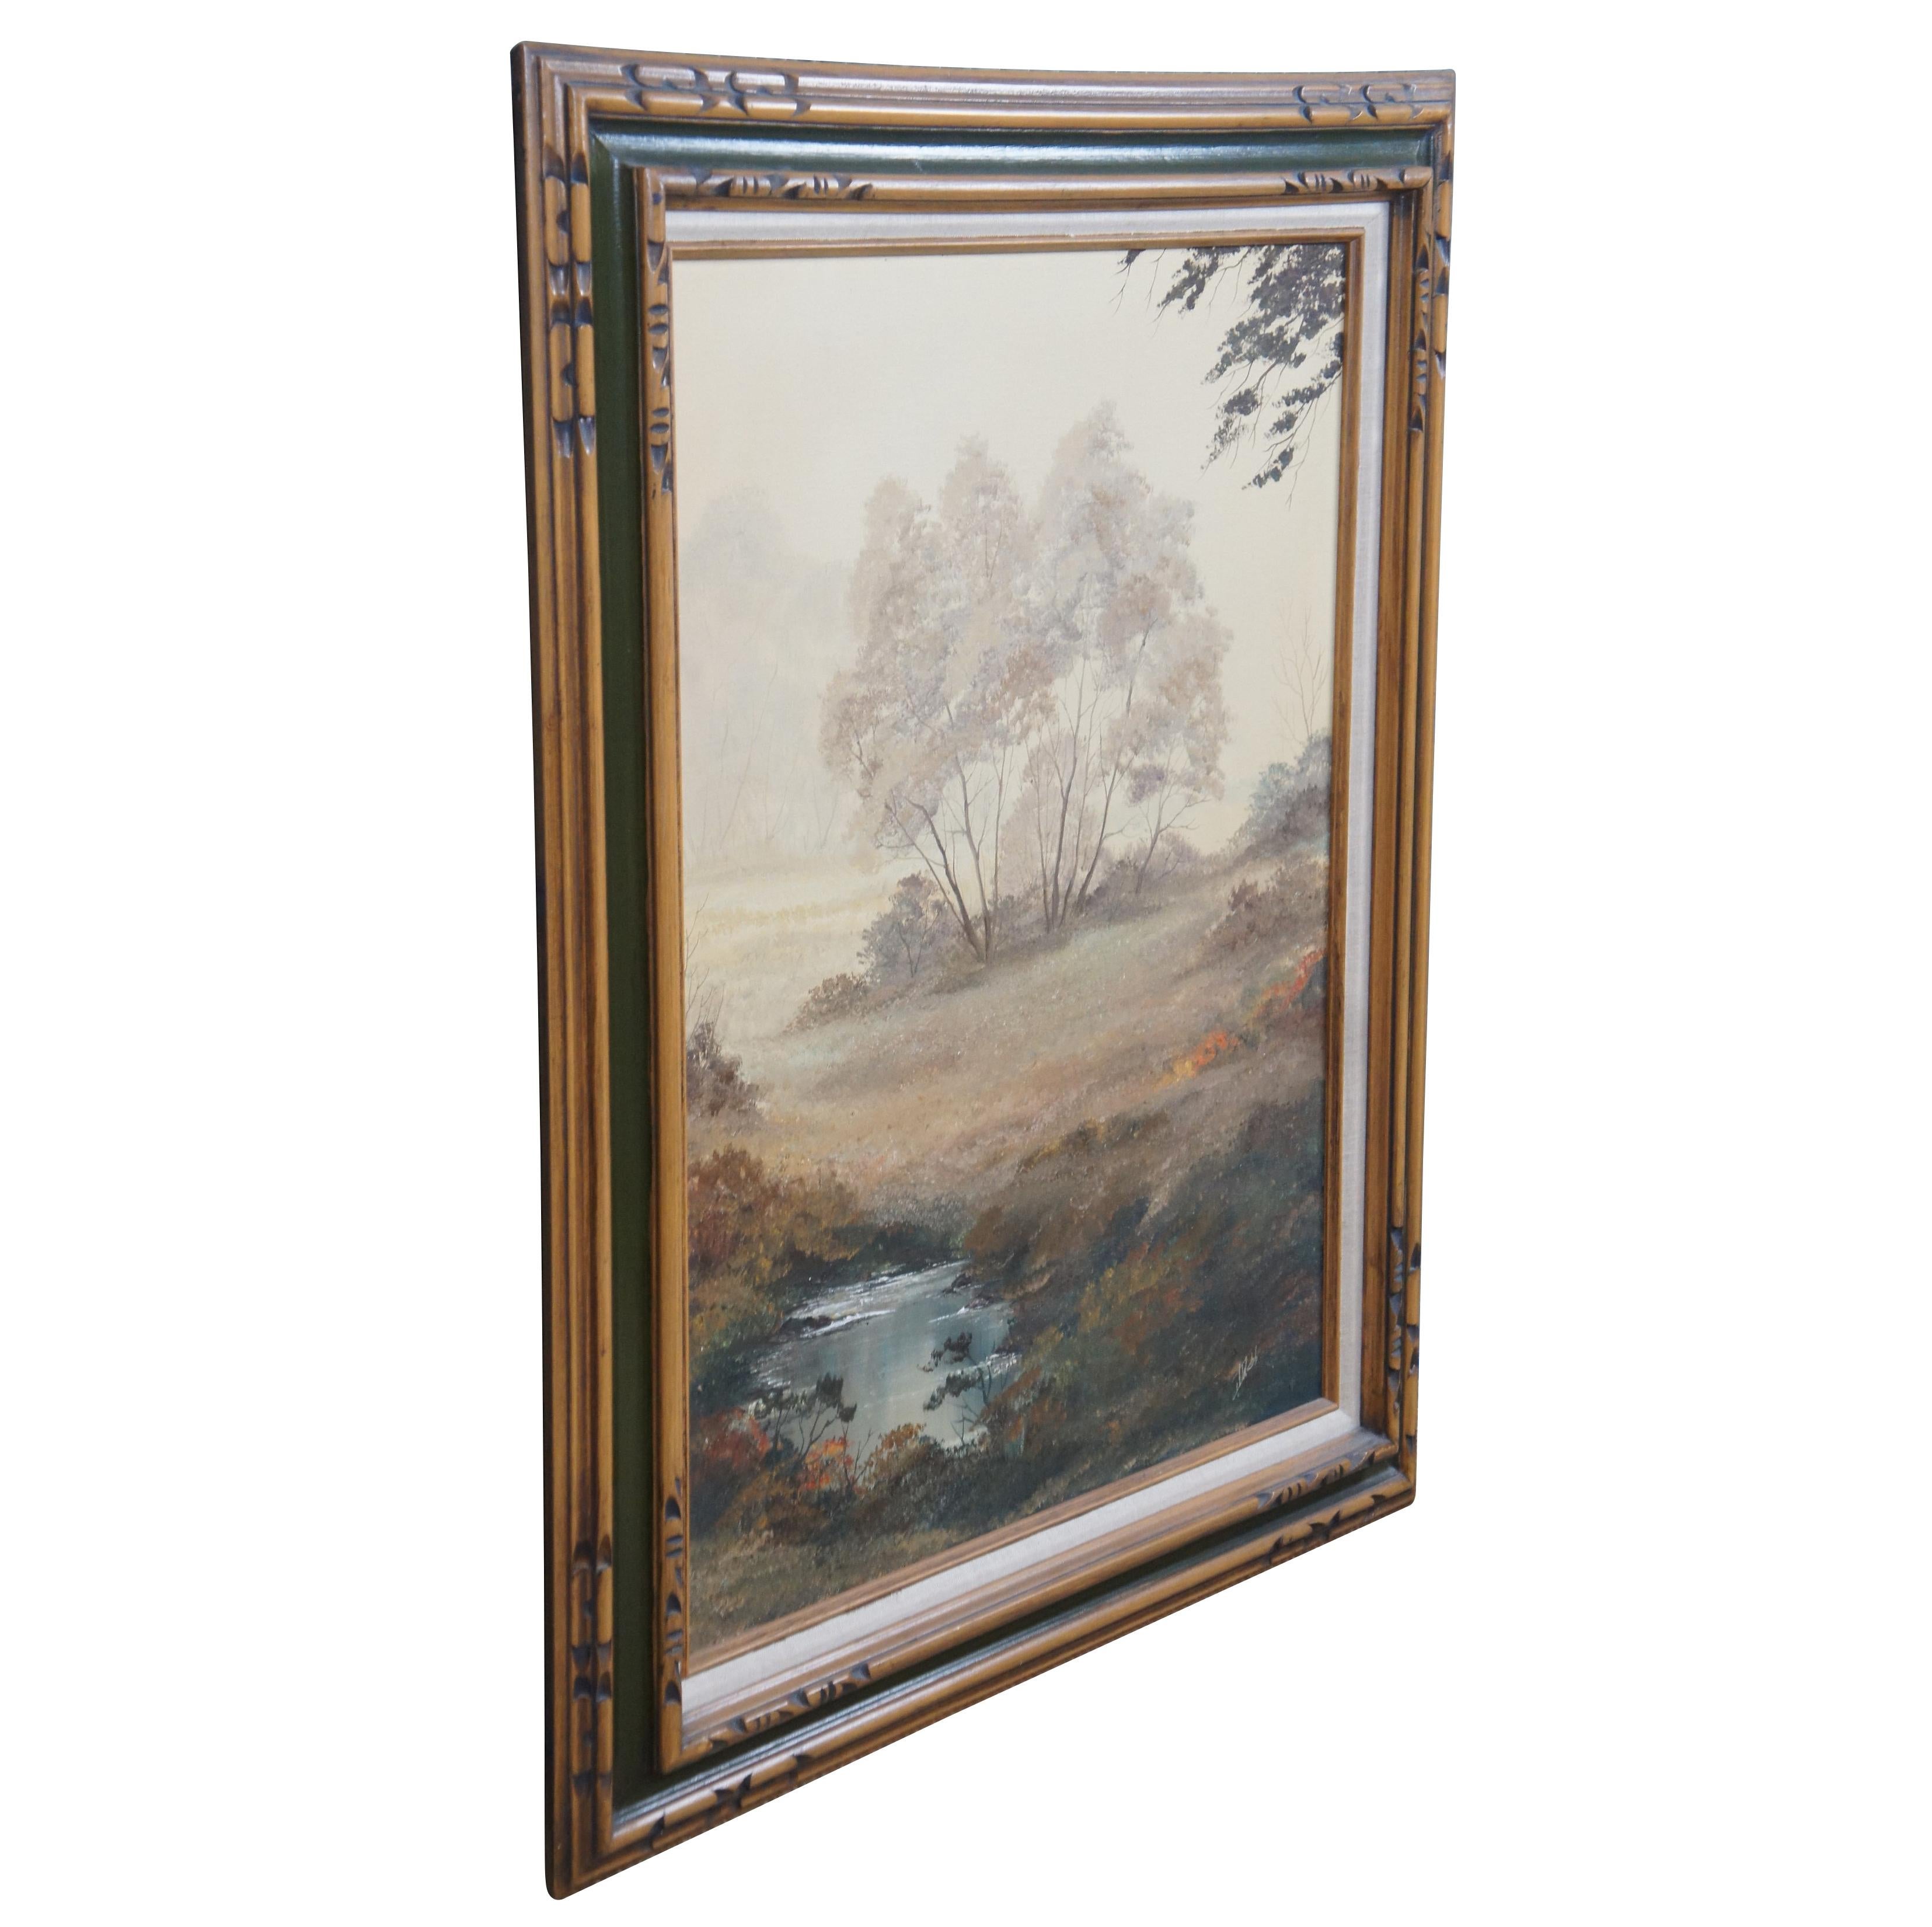 Vintage 1970s oil landscape painting. Features a view through the woods on a foggy day showing trees, grassland and a pond. The canvas is signed lower right and framed in wood with caved accents and green trim.

Dimensions

31.5